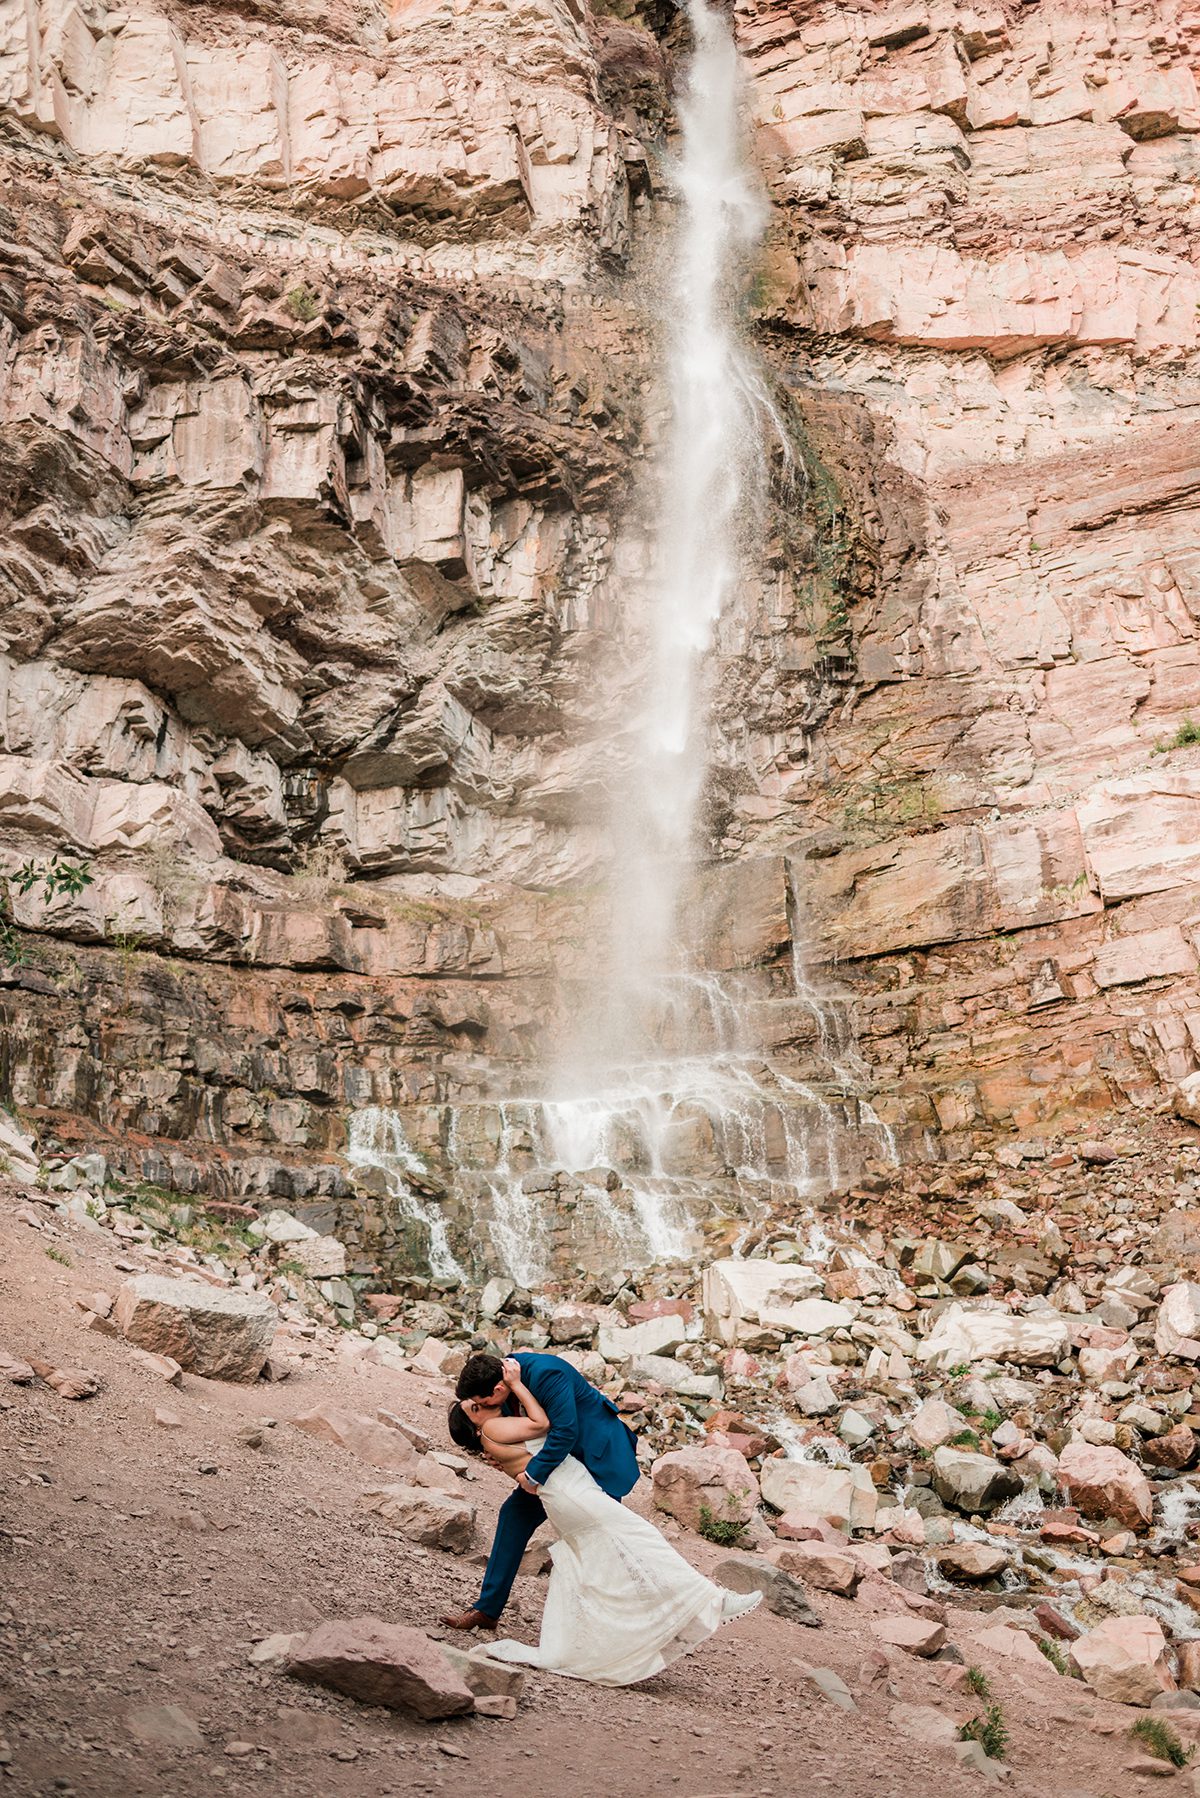 andrea and mckade share a kiss in front of the waterfall in ouray